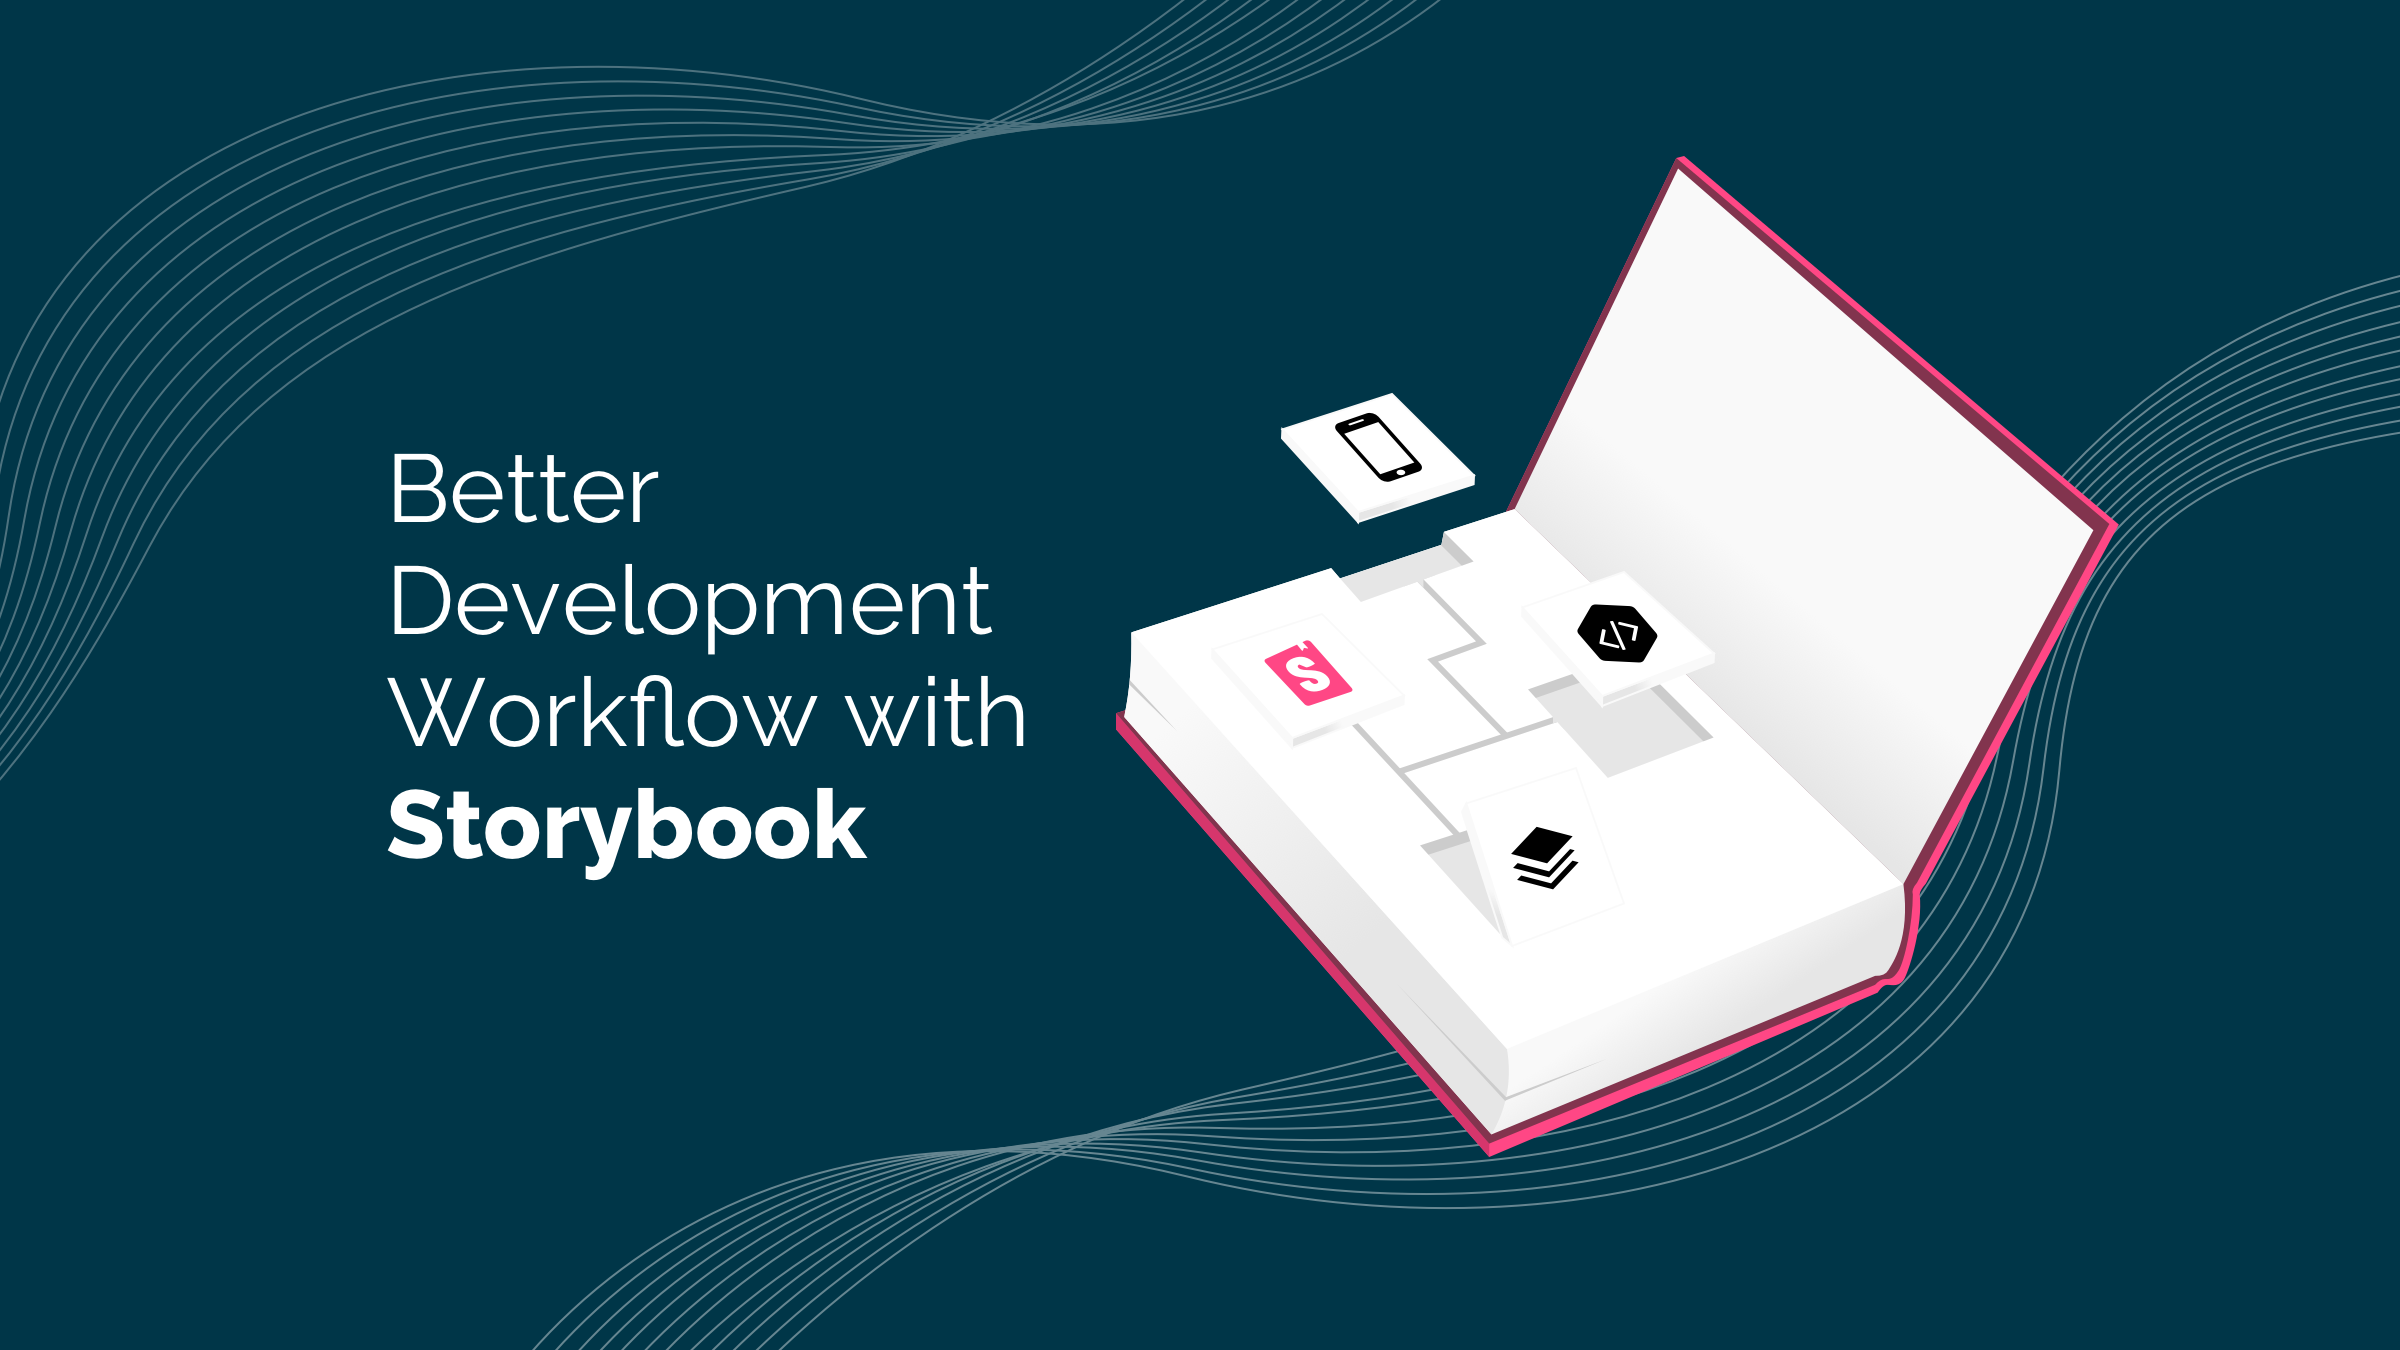 Using Storybook to Build a Better Product Development Workflow